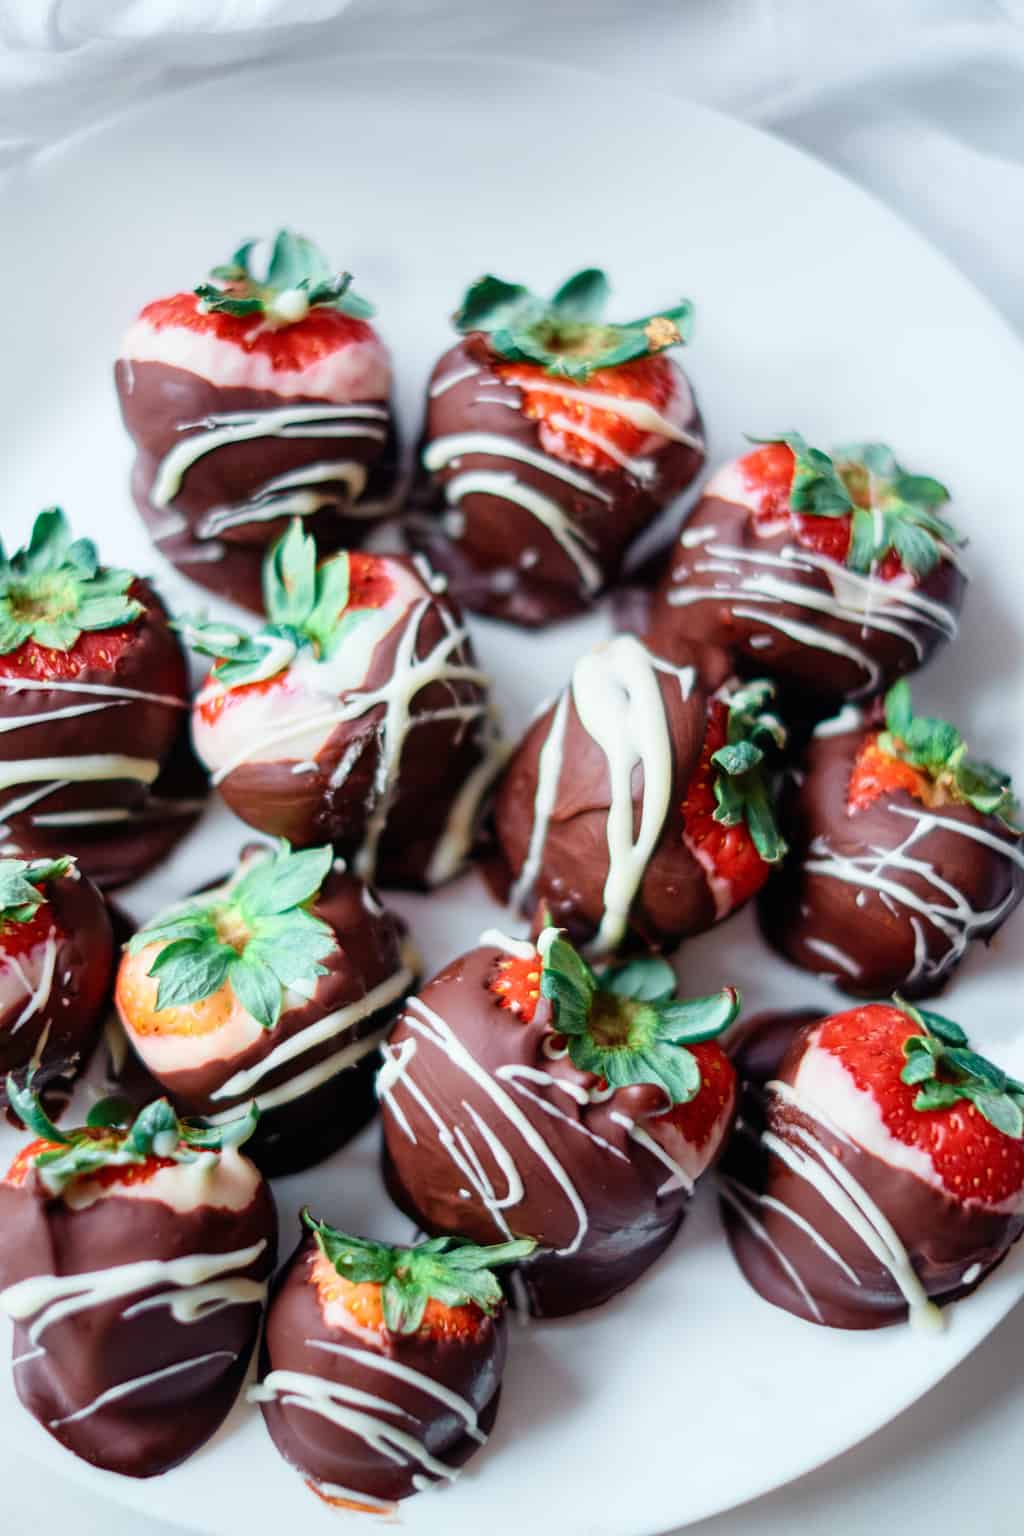 top down view of the finished chocolate coated strawberries served on a white plate